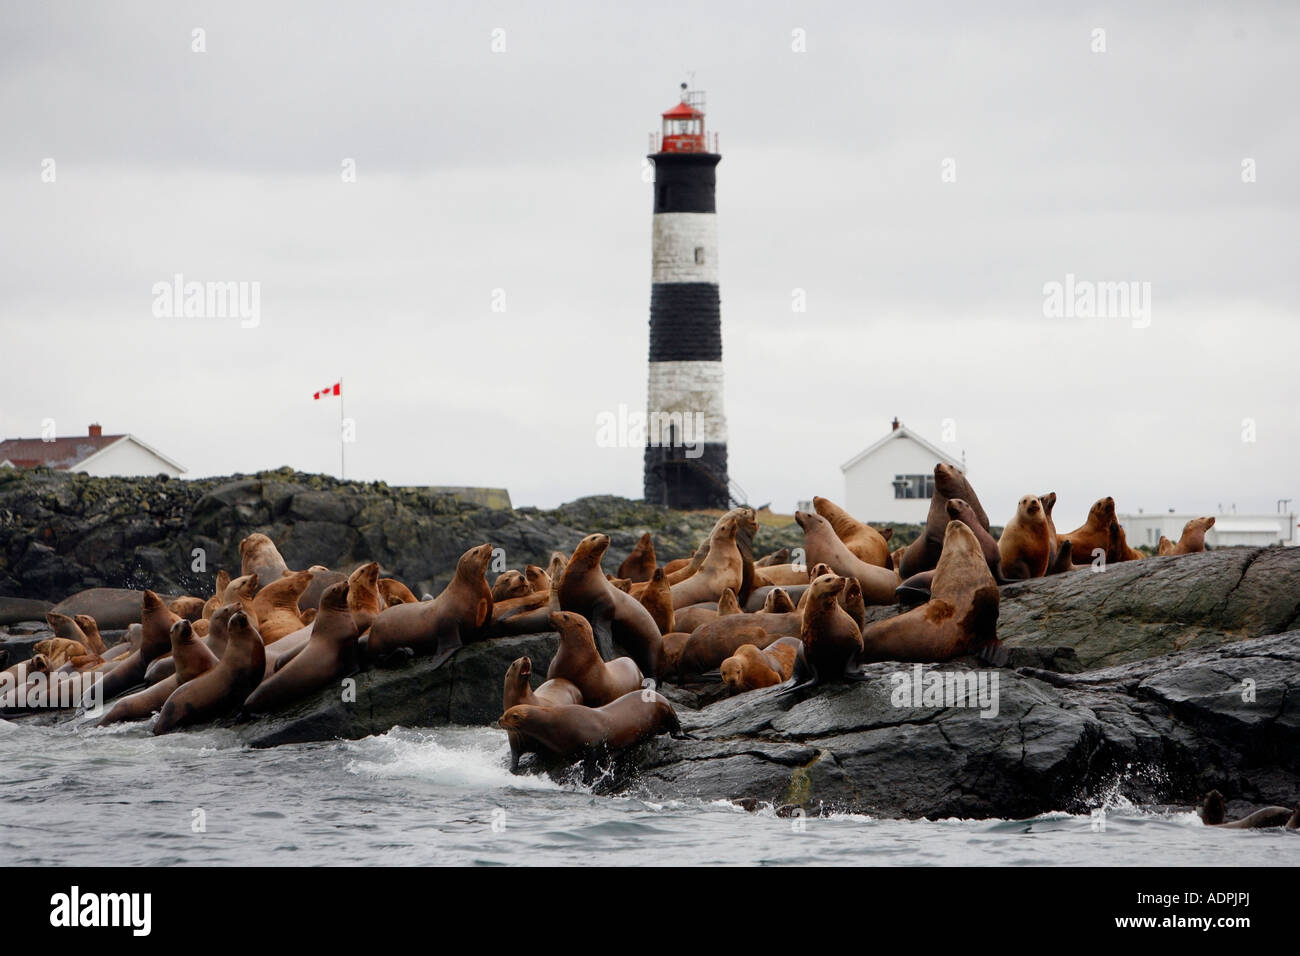 Sea lions resting near a lighthouse Stock Photo